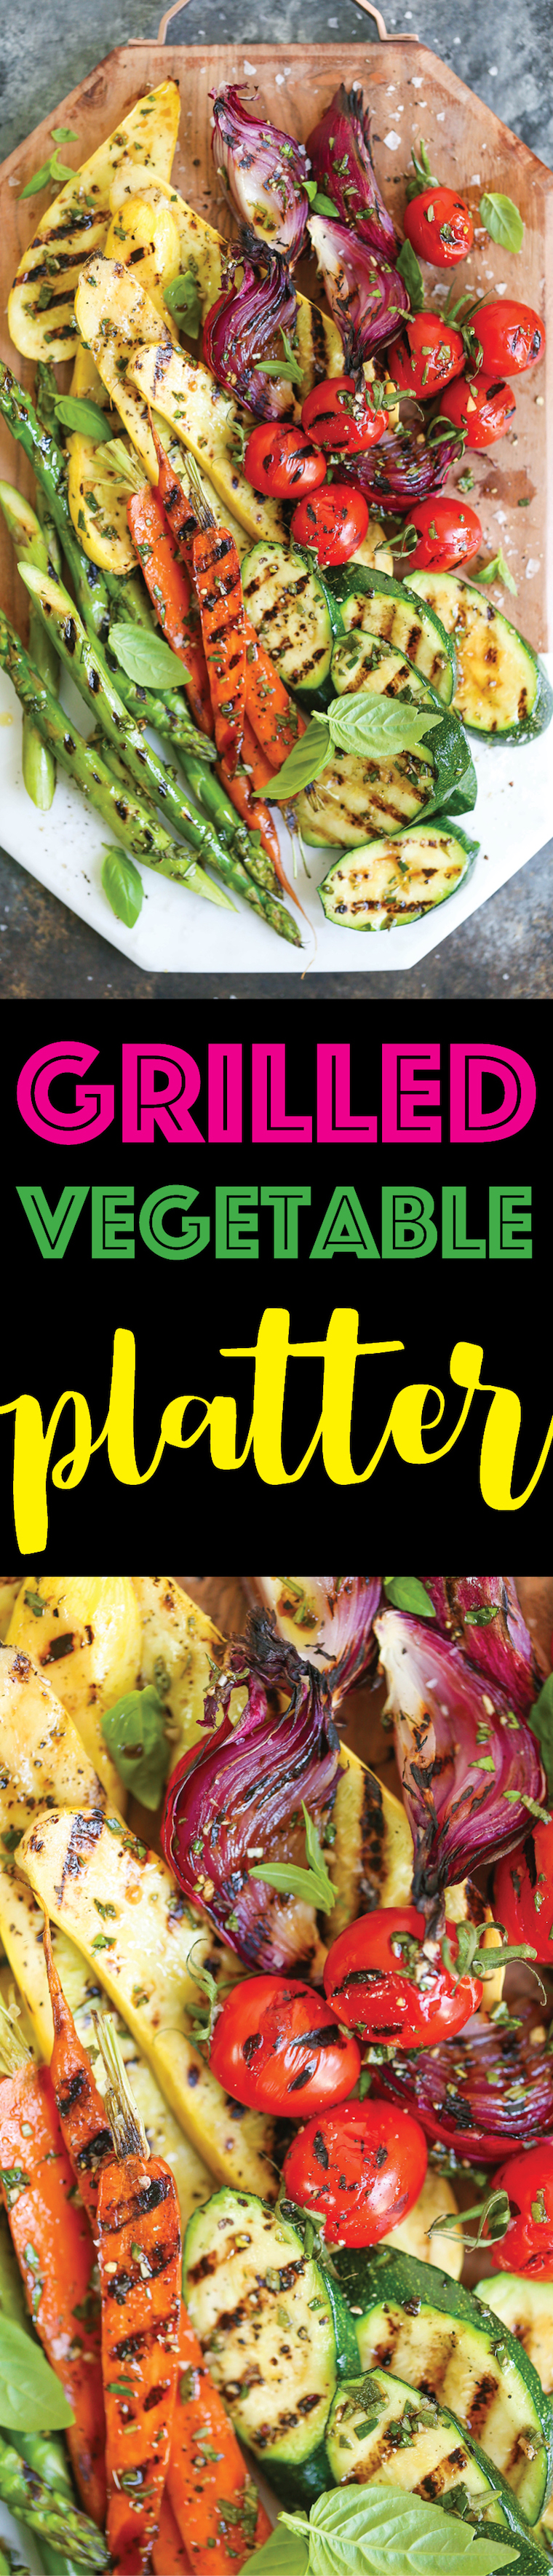 Grilled Vegetable Platter - How to assemble the most AWESOME vegetable platter! No more sad-looking veggies! This is so easy and perfect for entertaining!